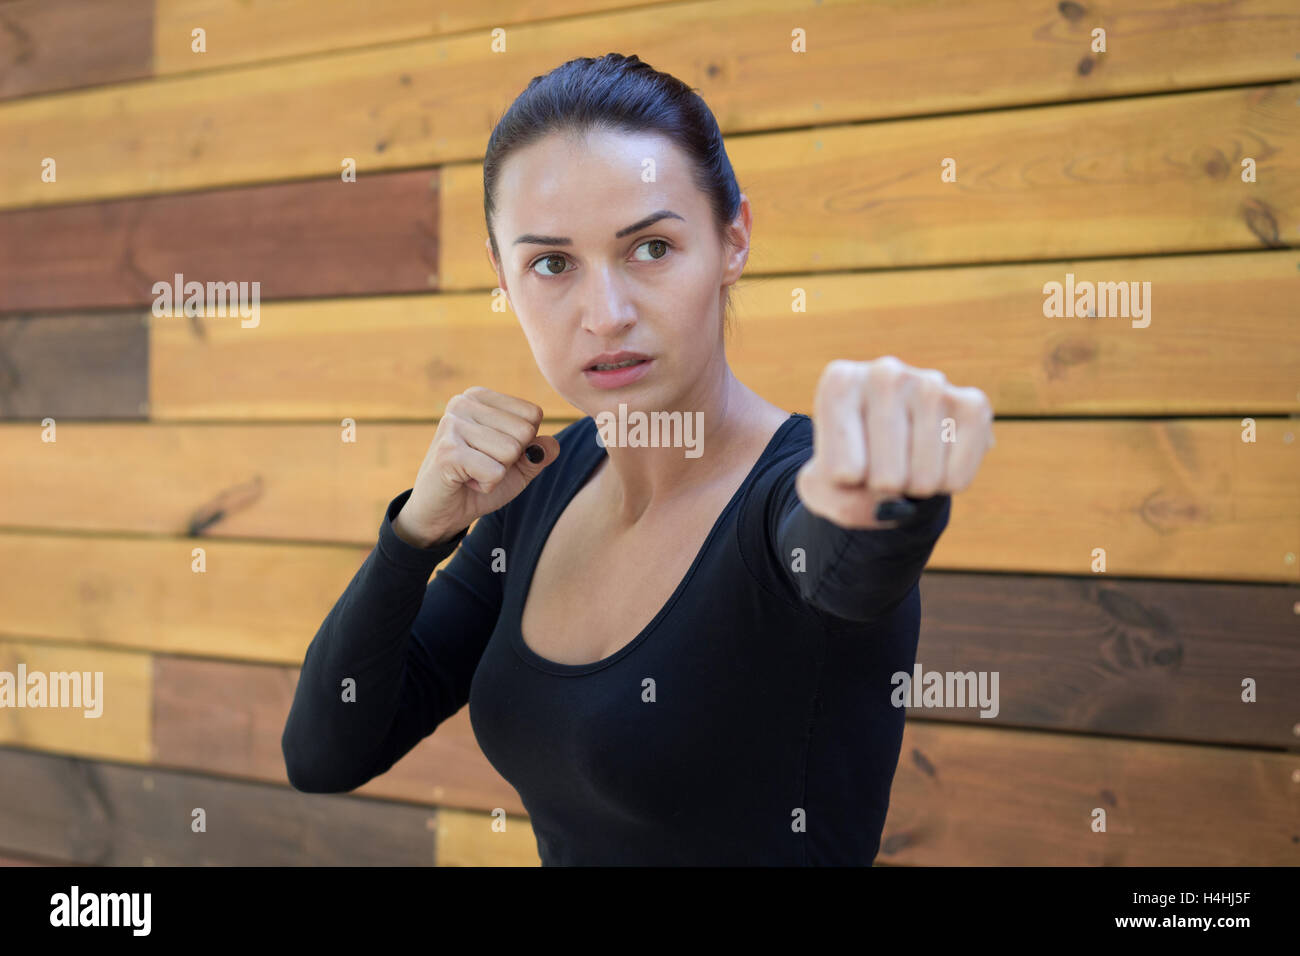 Young pretty fitness woman exercises during boxing training workout at wooden pallete background Stock Photo